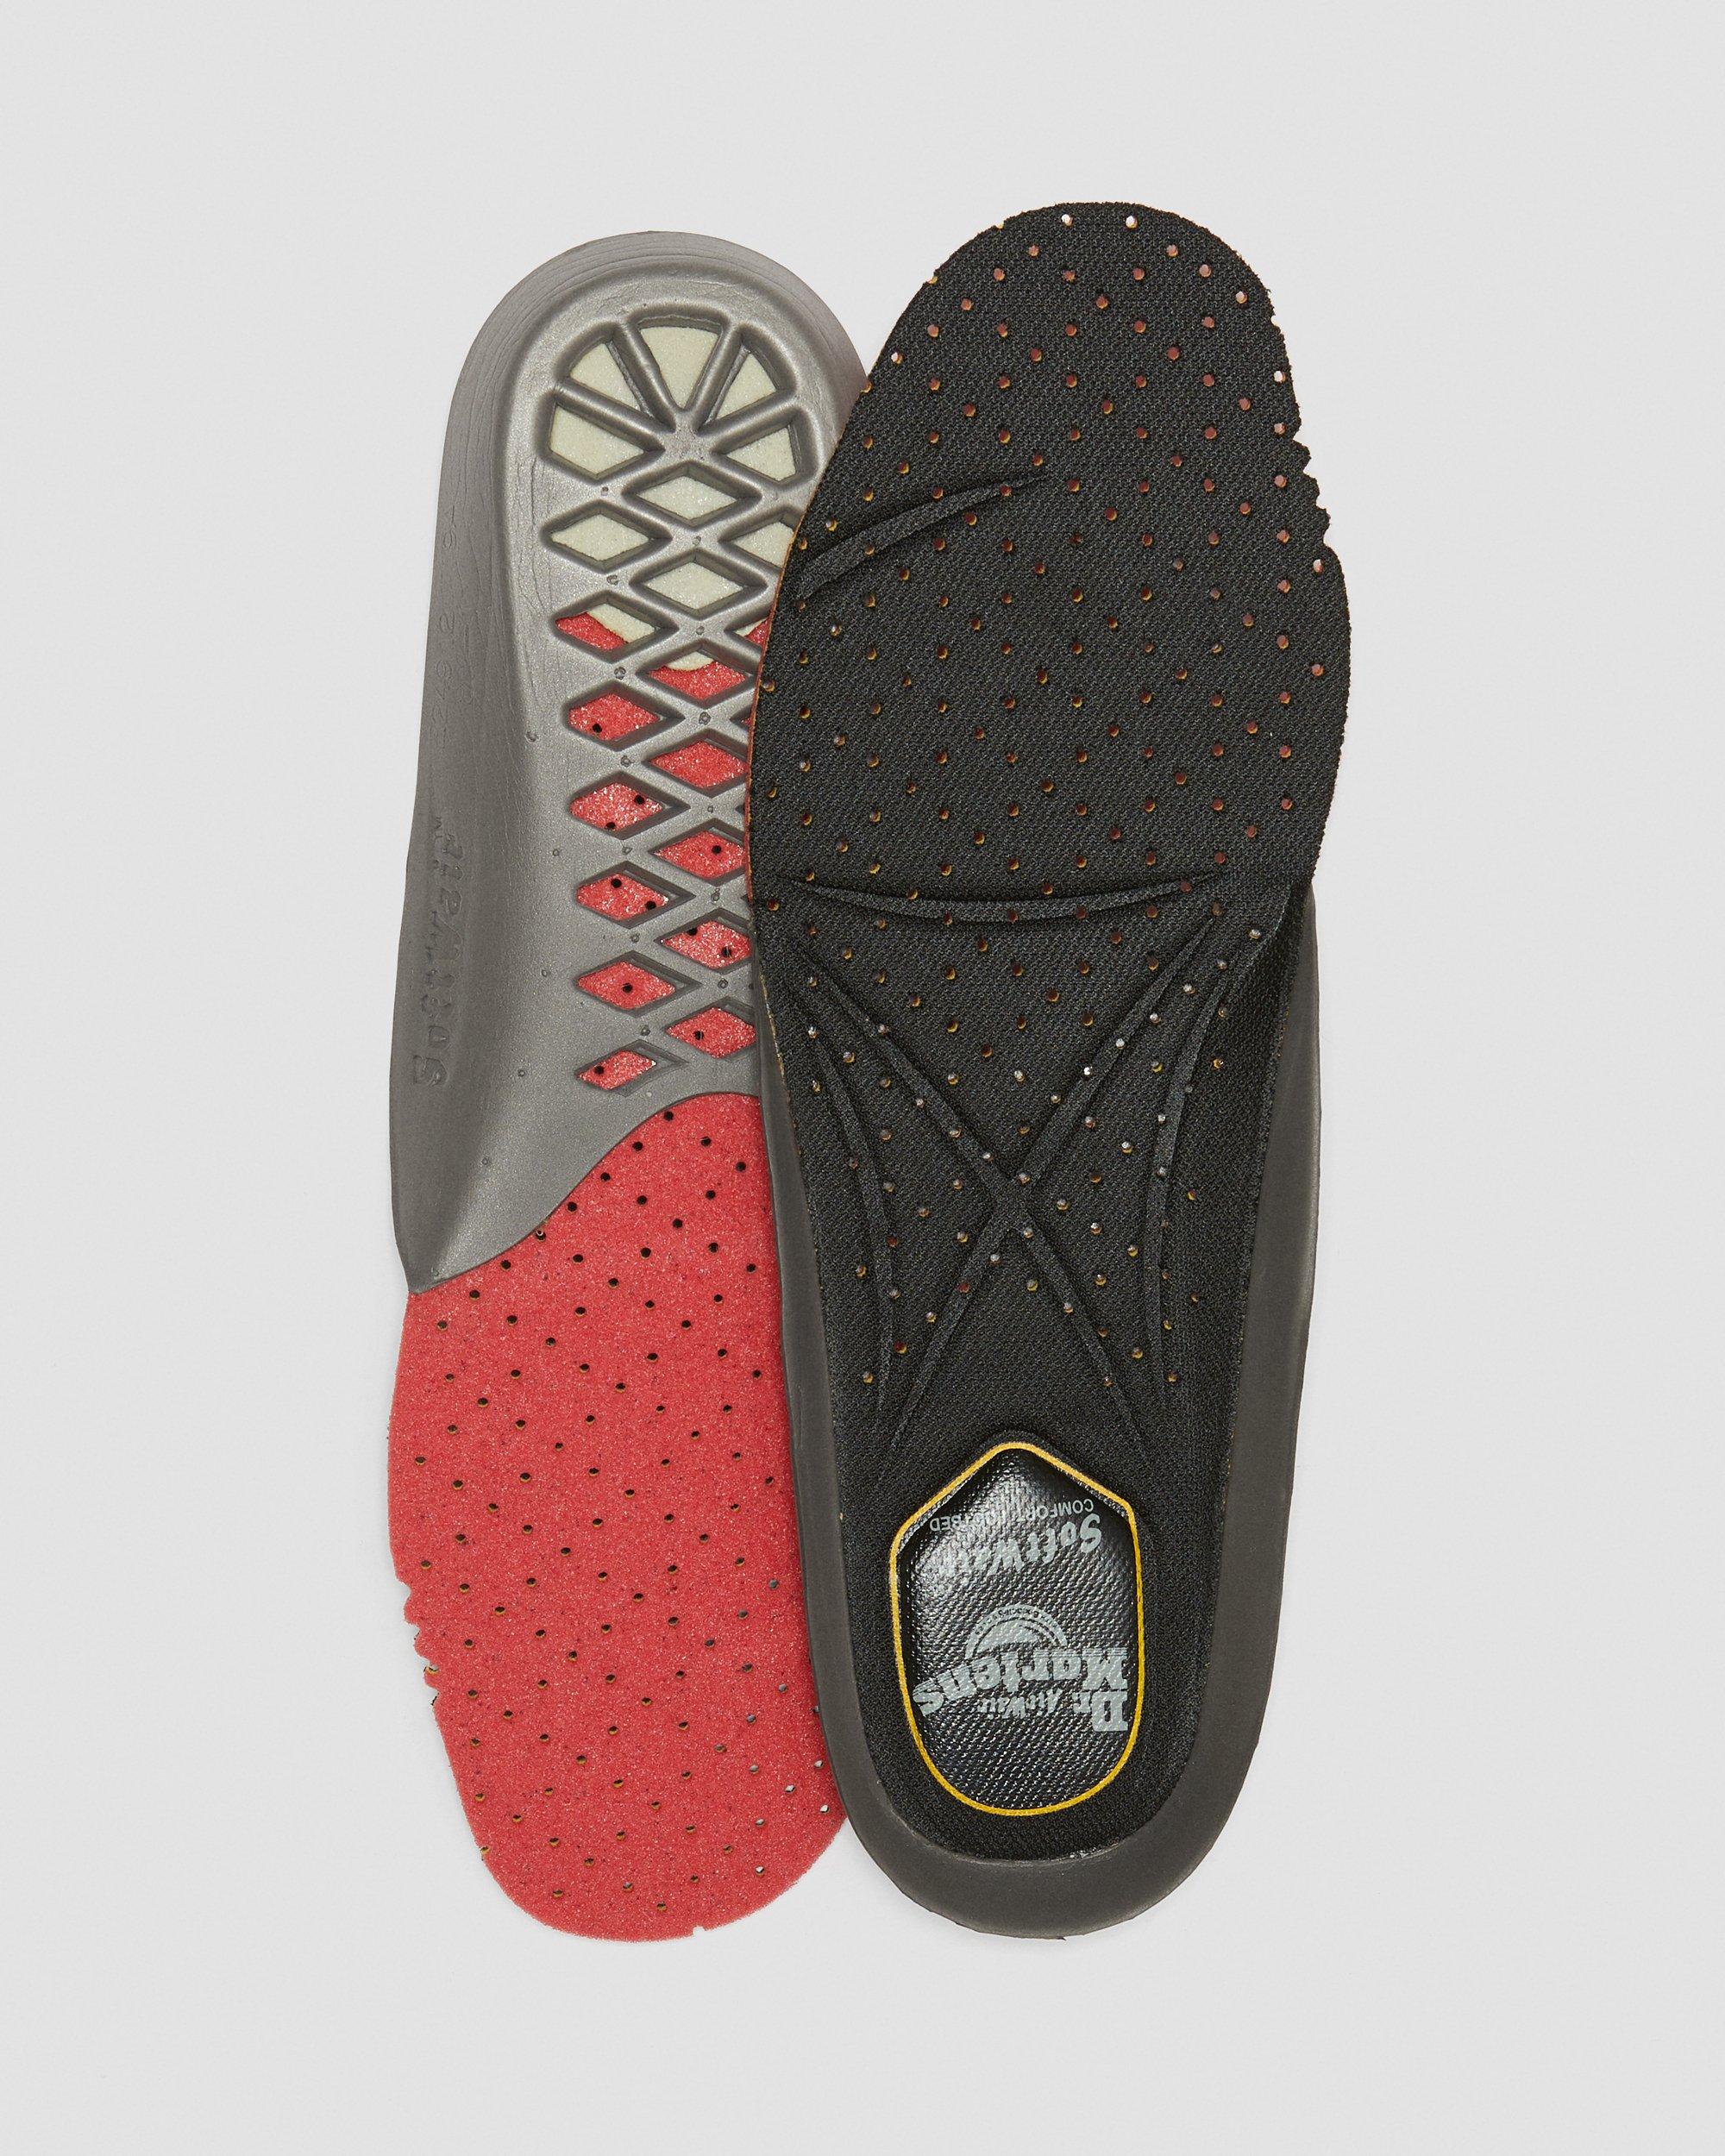 Softwair Insole | Dr. Martens